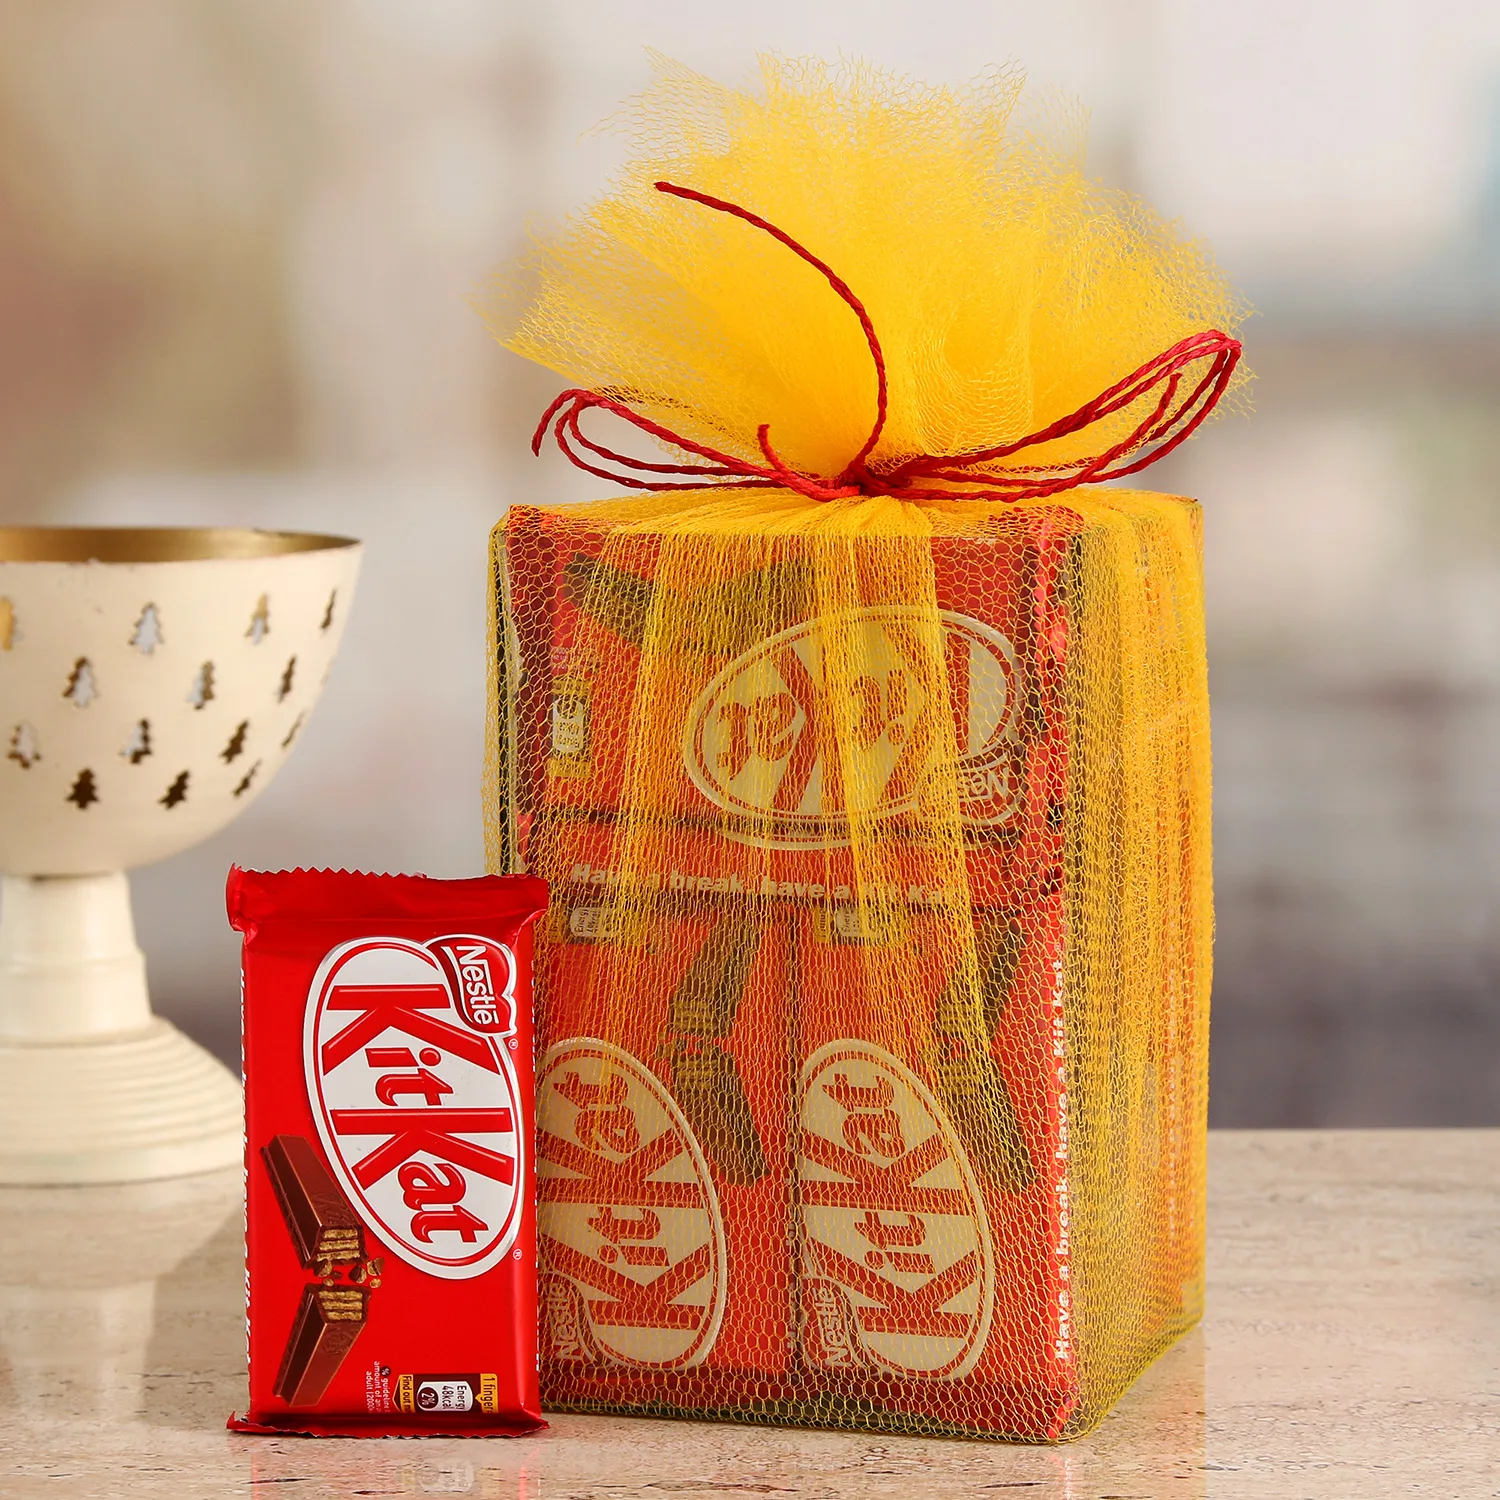 Uphar Creations Birthday Special kitkat Bouquet for Your Dear Ones |  Chocolate Gifts For chocolate lovers| -